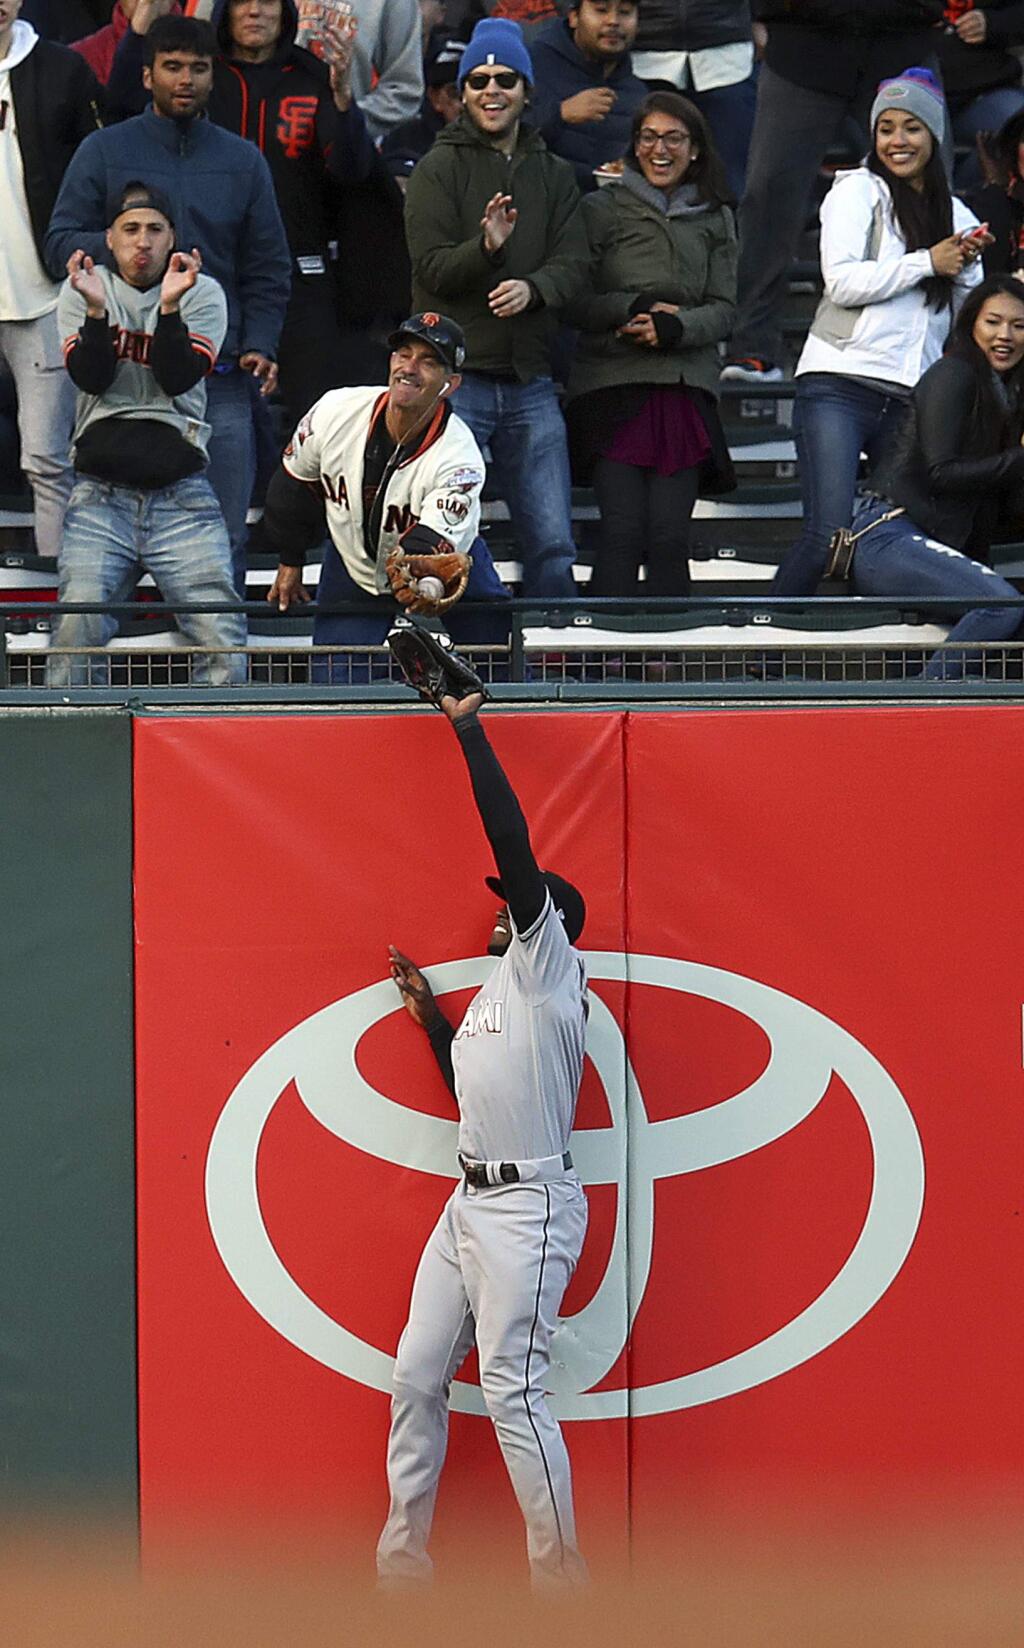 A fan catches a two-run home run hit by San Francisco Giants' Pablo Sandoval over Miami Marlins left fielder Cameron Maybin in the second inning of a baseball game Monday, June 18, 2018, in San Francisco. (AP Photo/Ben Margot)